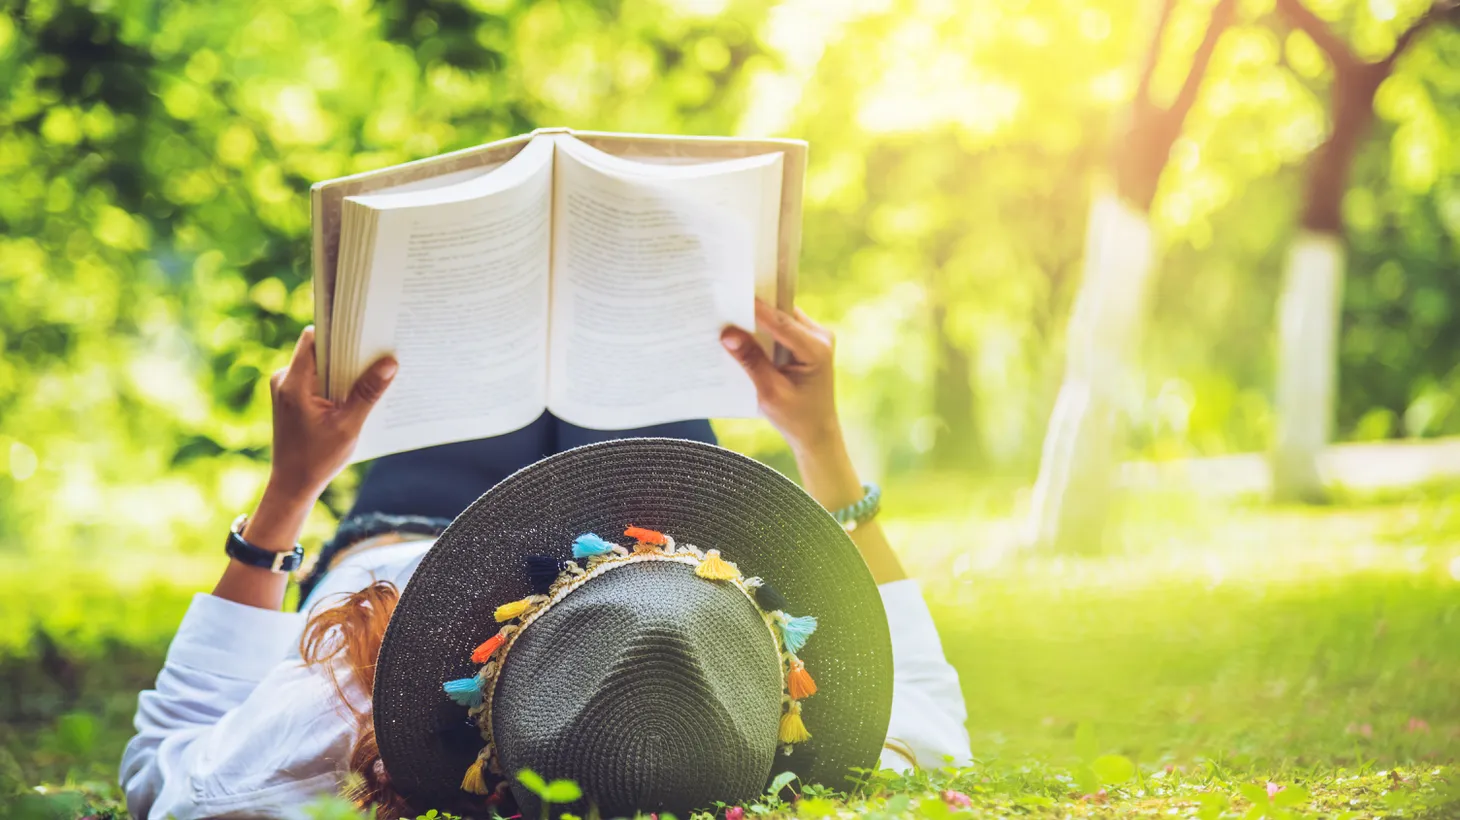 From climate change nonfiction to short stories and a mystery novel, KCRW gets recommendations for summer reading.